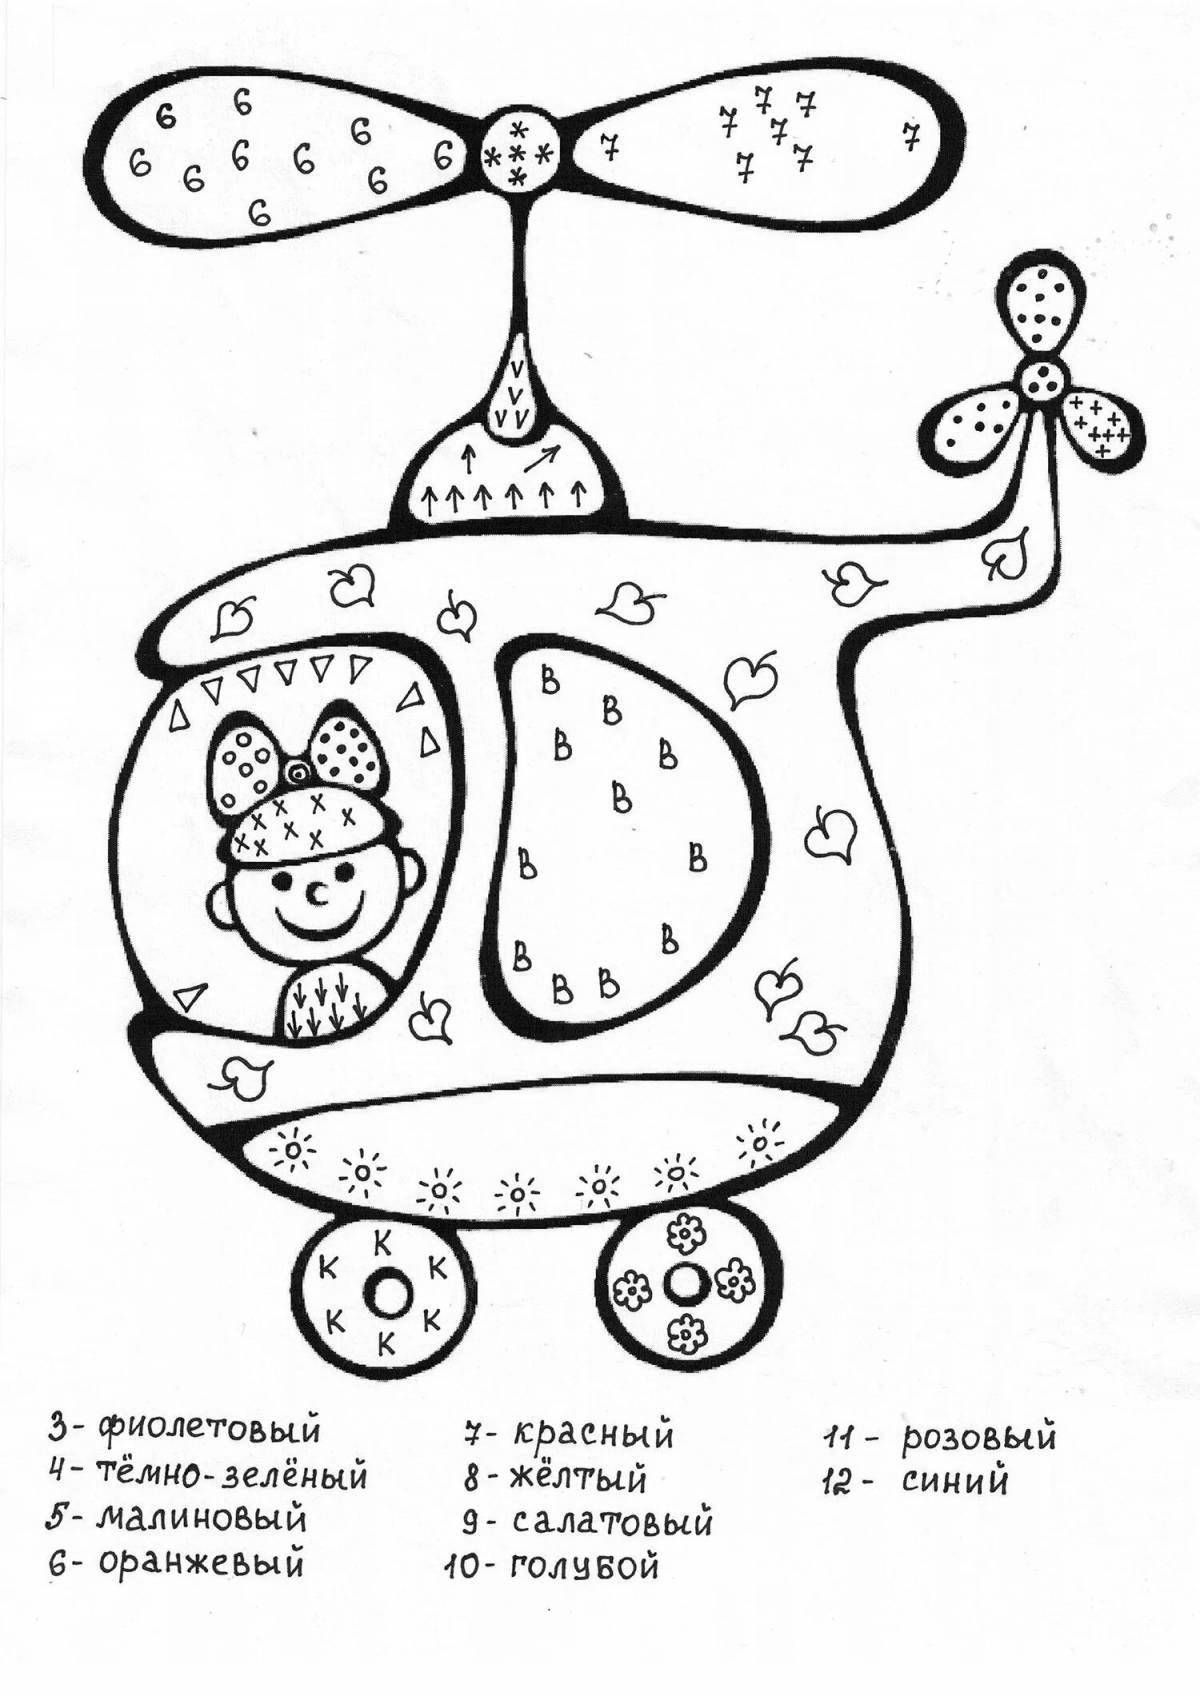 Colorful counting up to 10 coloring pages for preschoolers